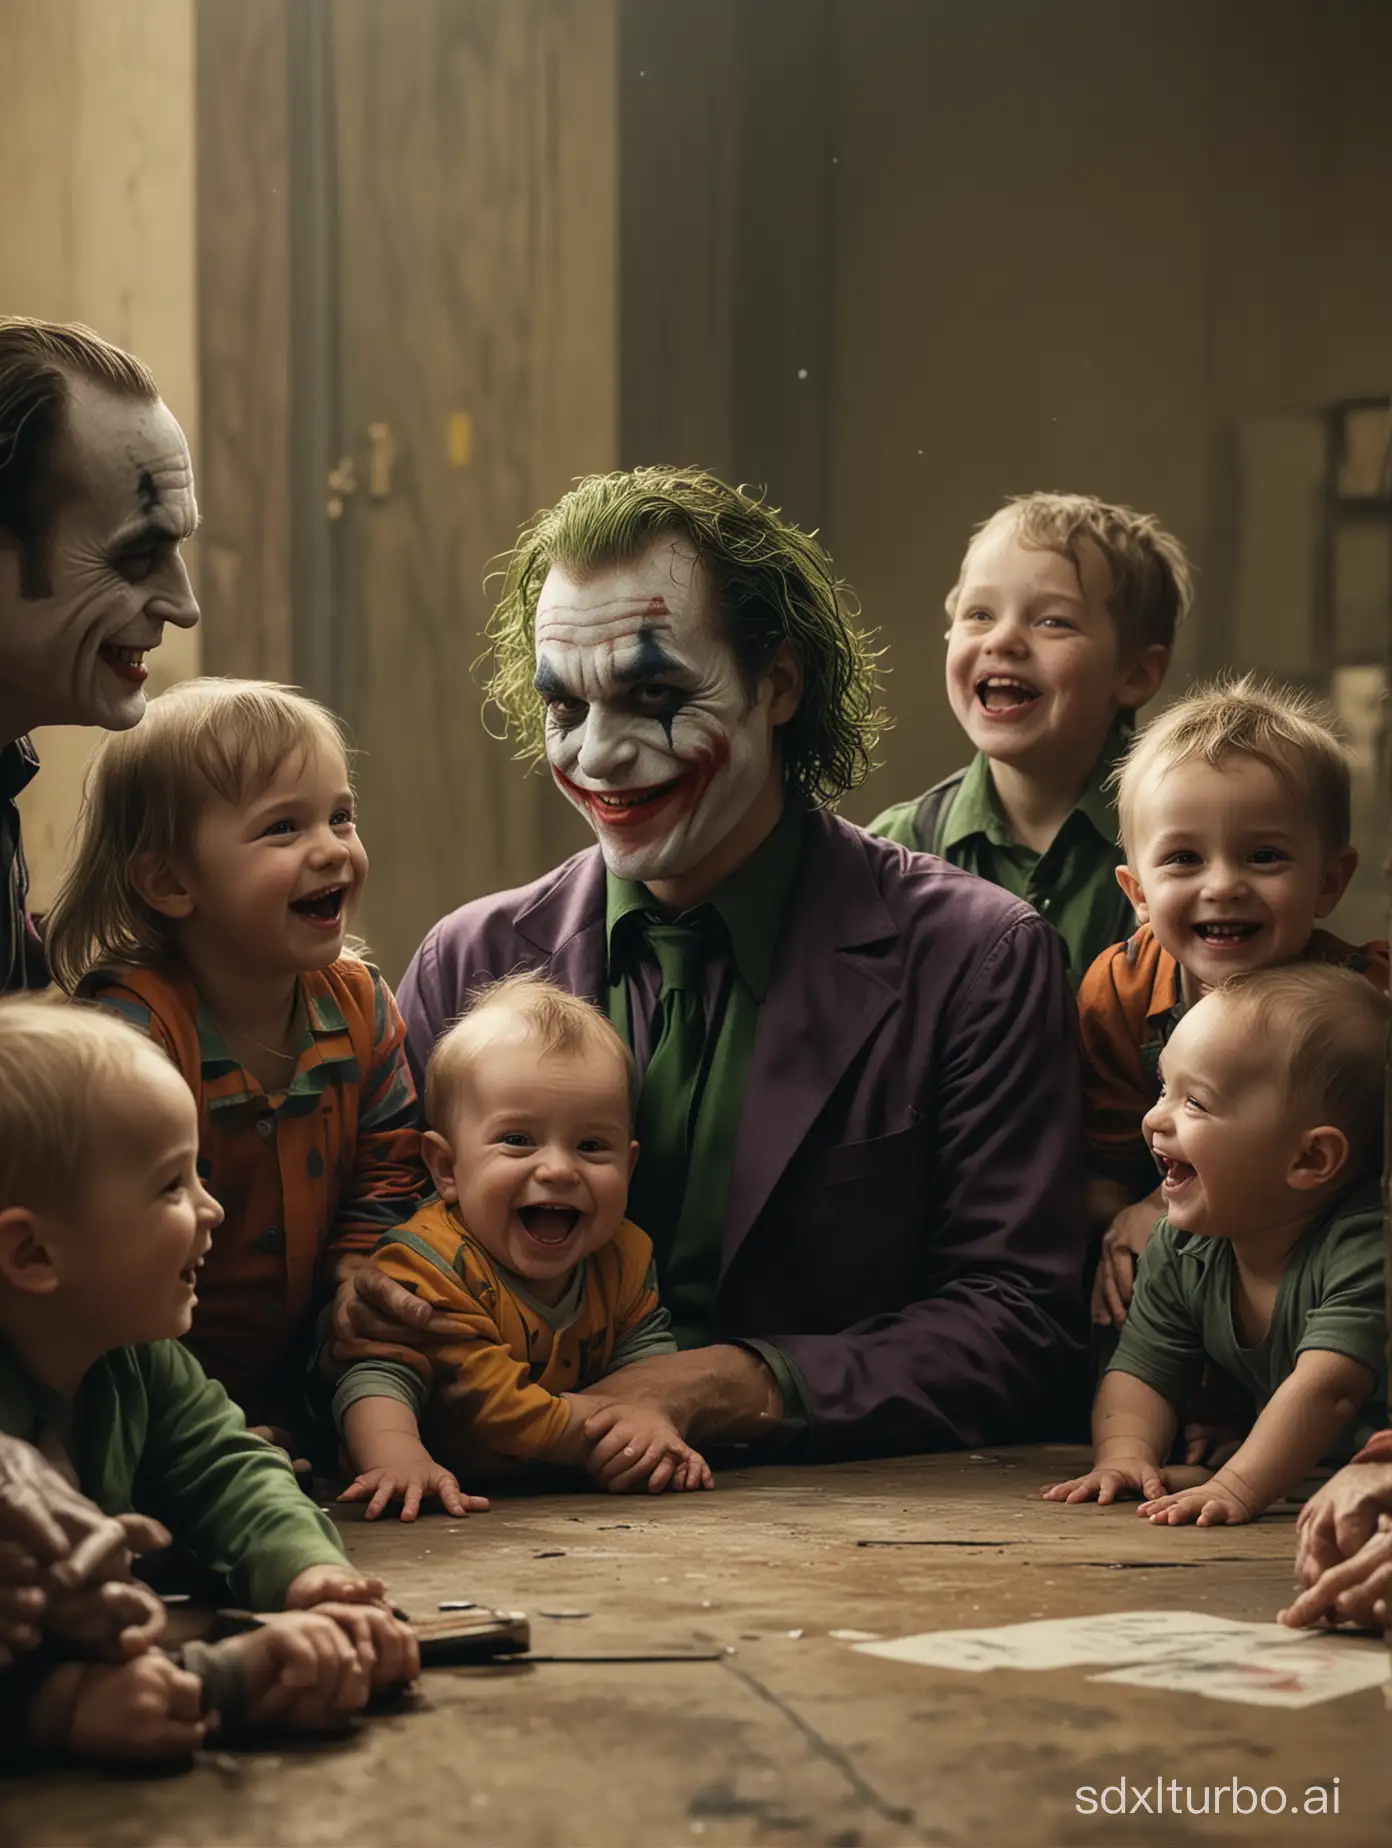 Masterpiece, top quality, ultra-fine, real, 4k, 8K, babies and the Joker interacting with smiles